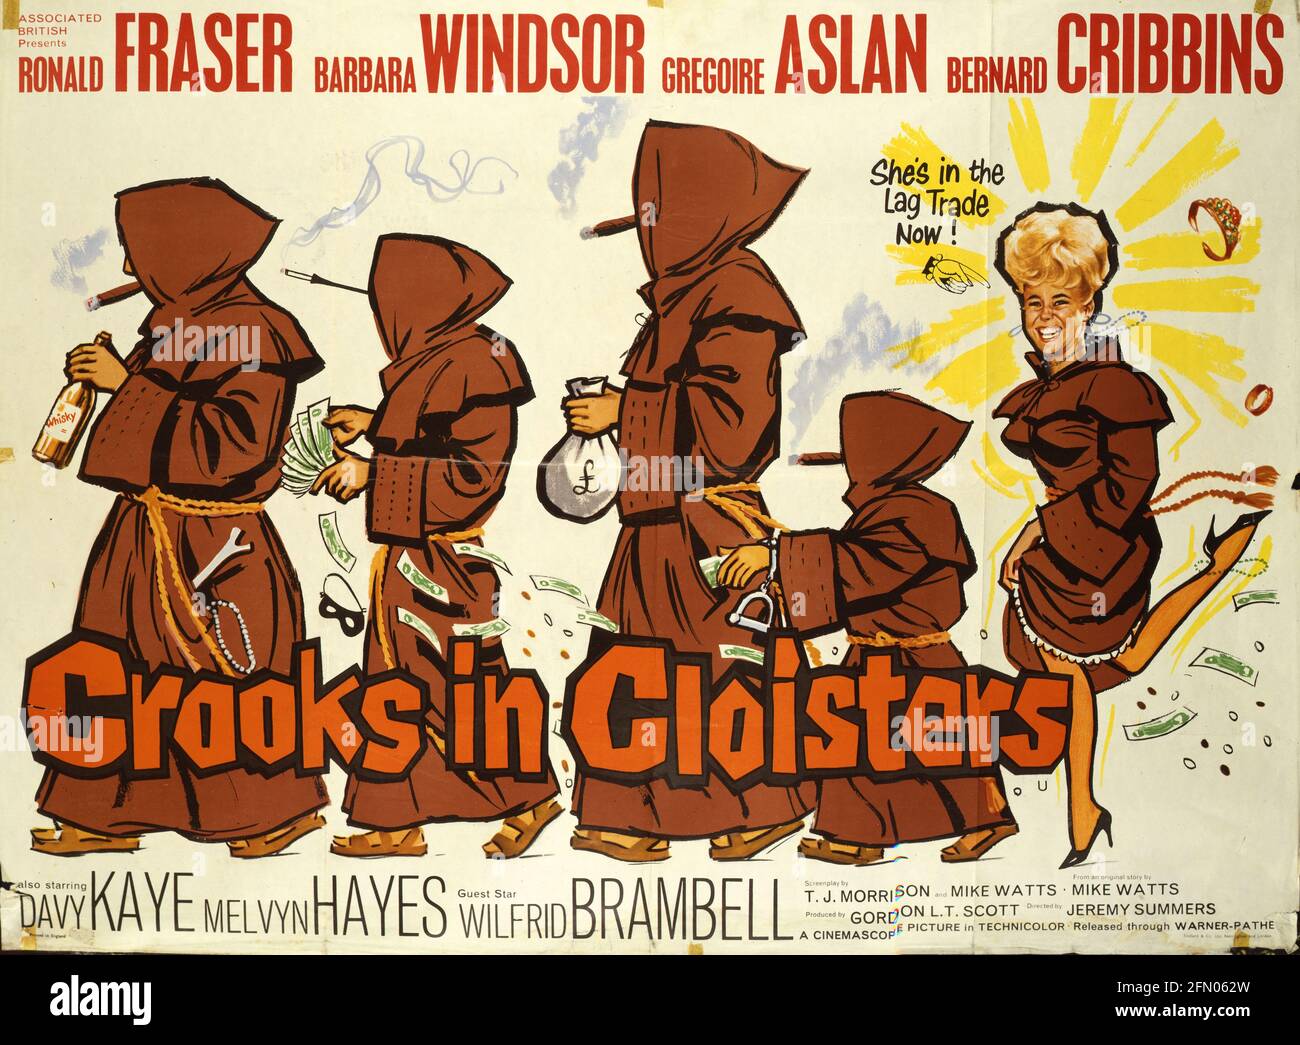 Crooks in Cloisters (1964) Publicity information, Film poster     Date: 1964 Stock Photo